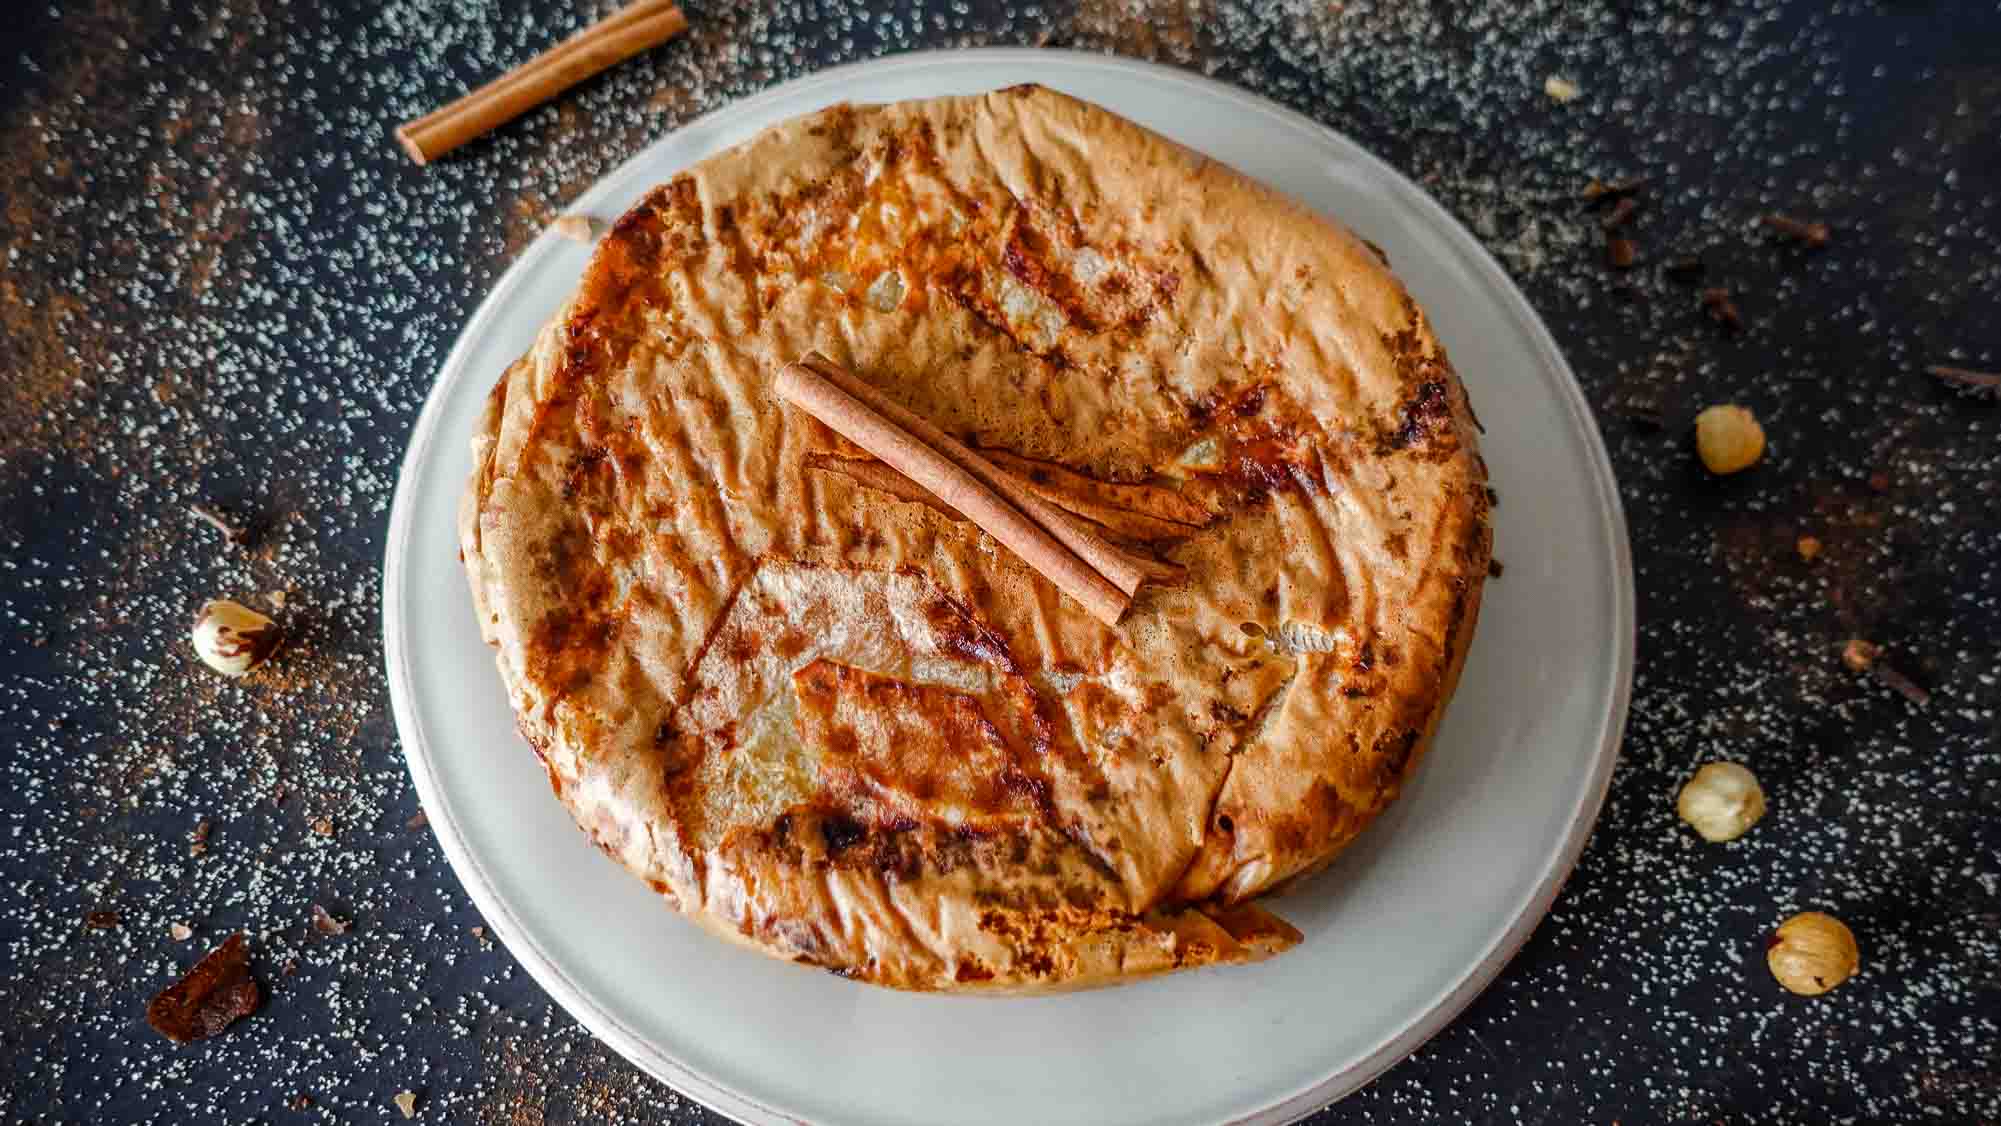 Apple Cinnamon cake on a plate with a cinnamon stick on top.